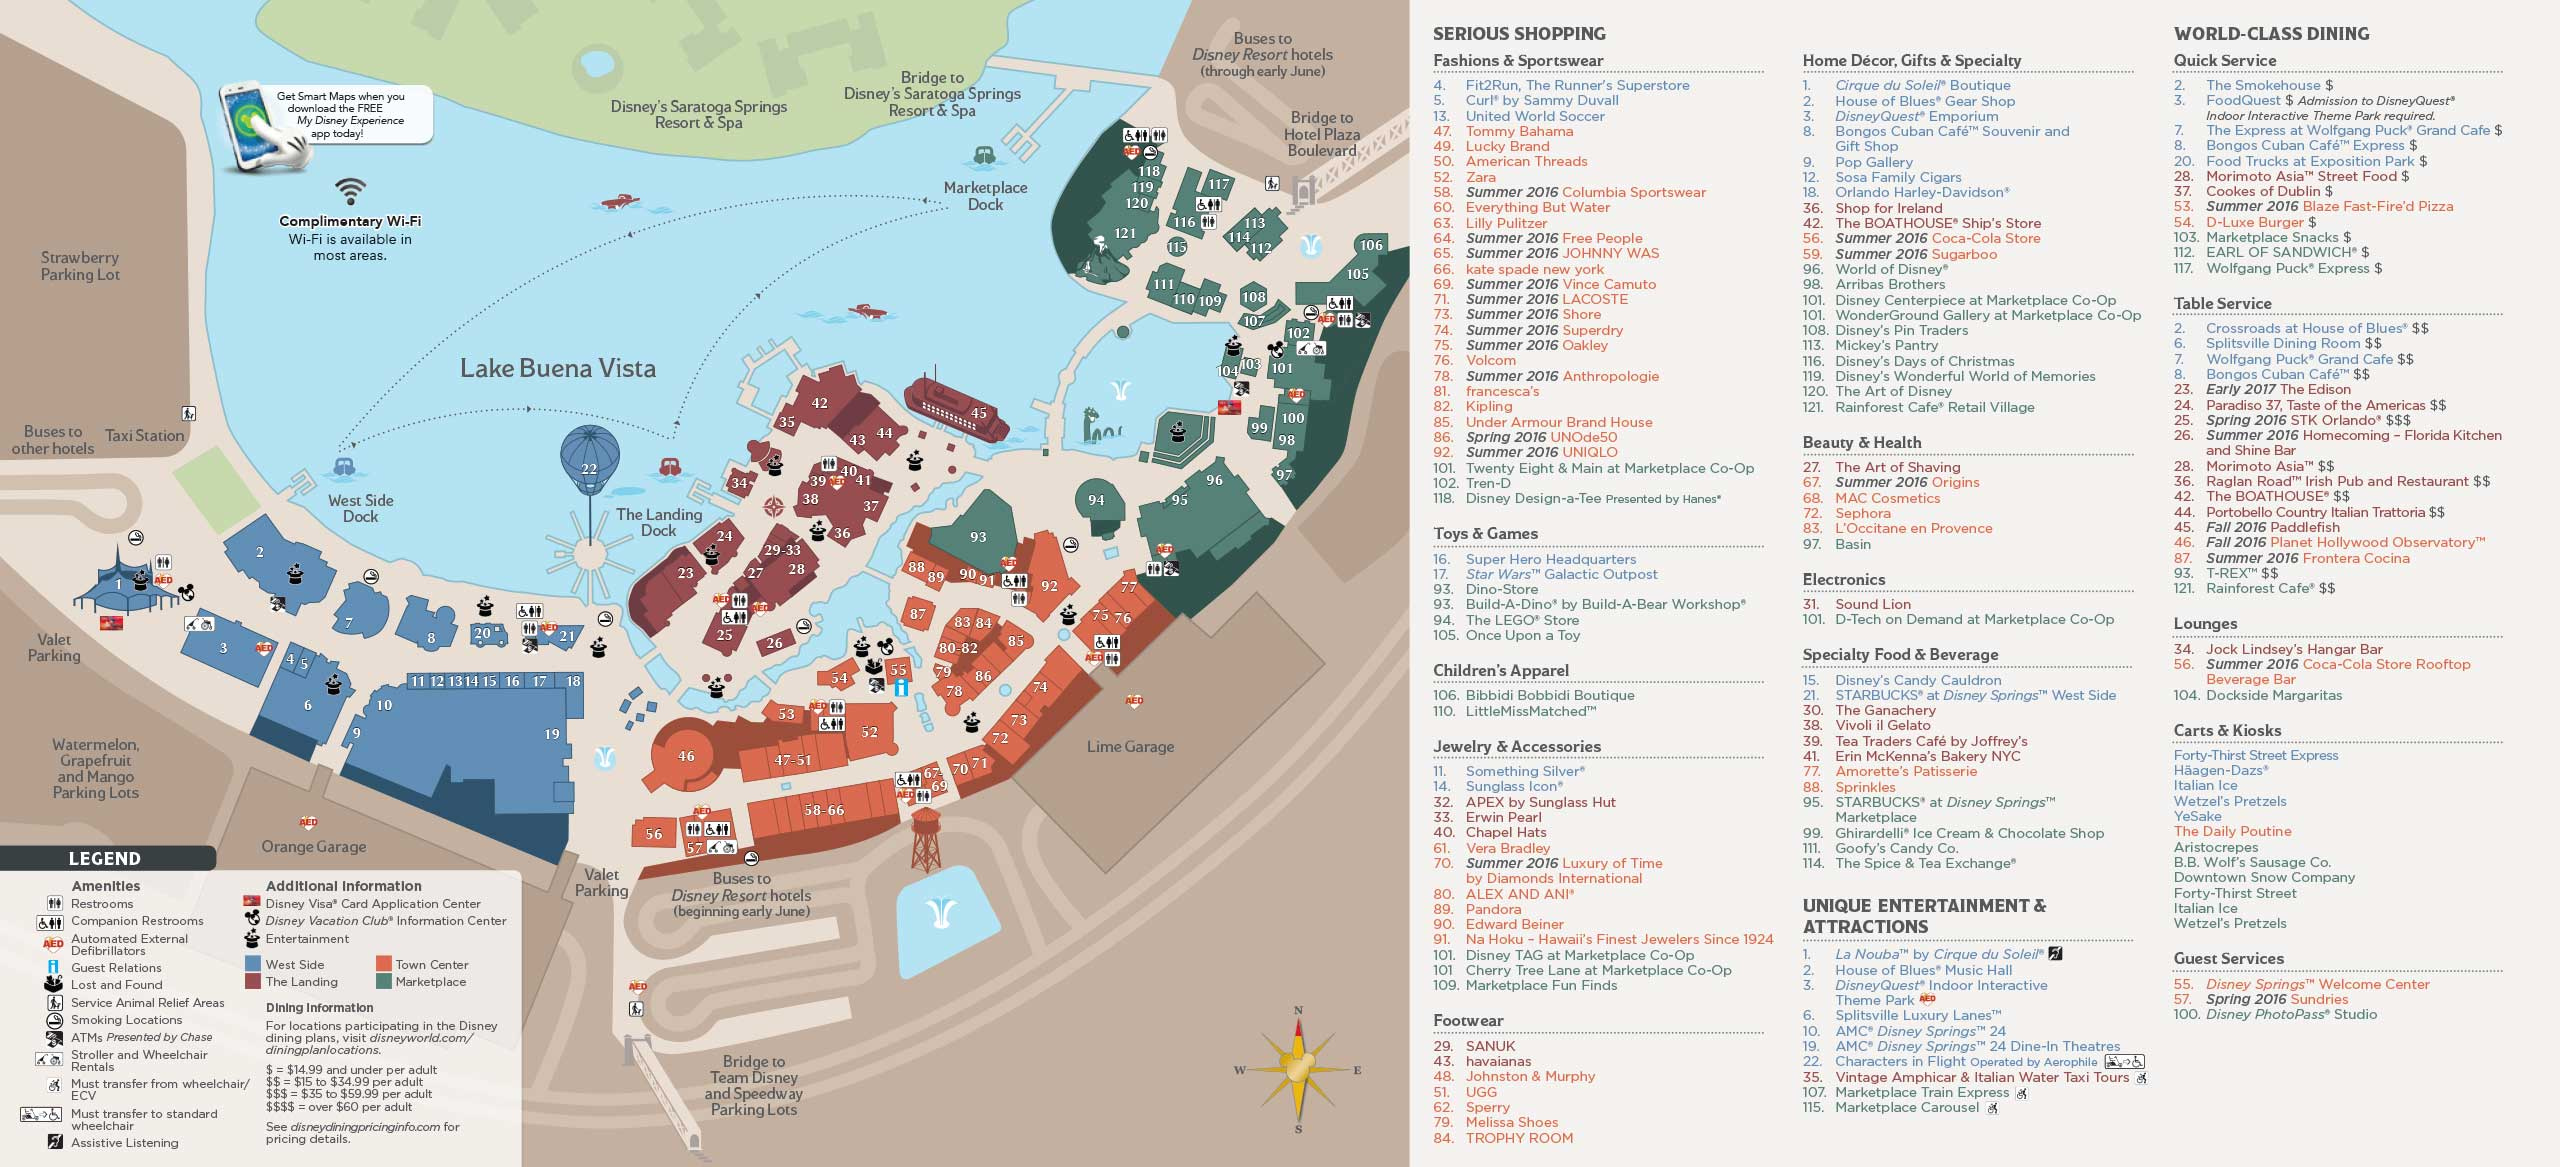 PHOTOS Revised Guide Map Format For Disney Springs With The Opening 